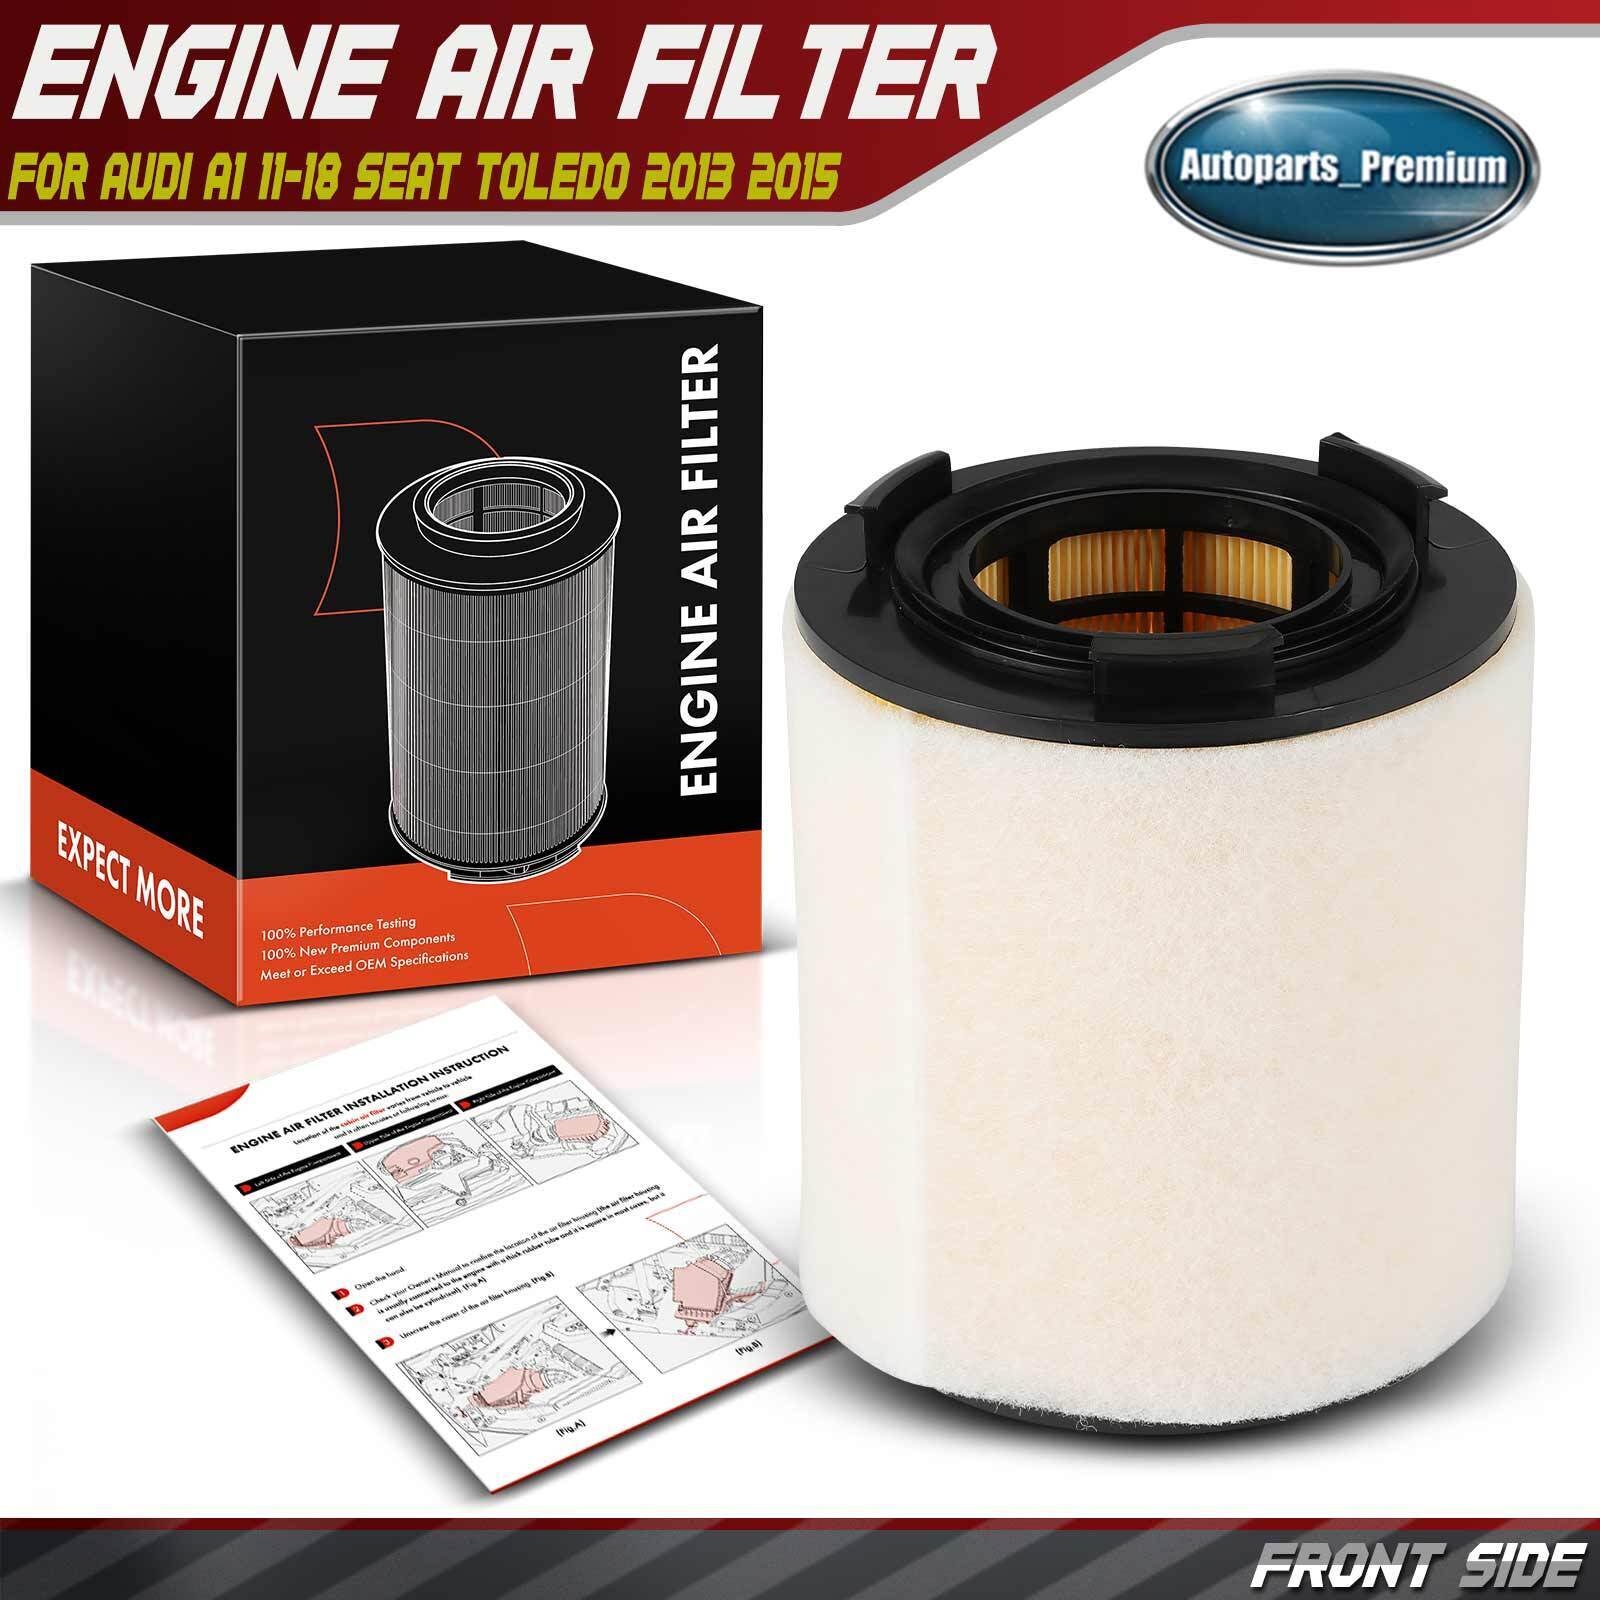 Engine Air Filter for Audi A1 11-18 Seat Toledo 2013 2015 Volkswagen Polo 13-17